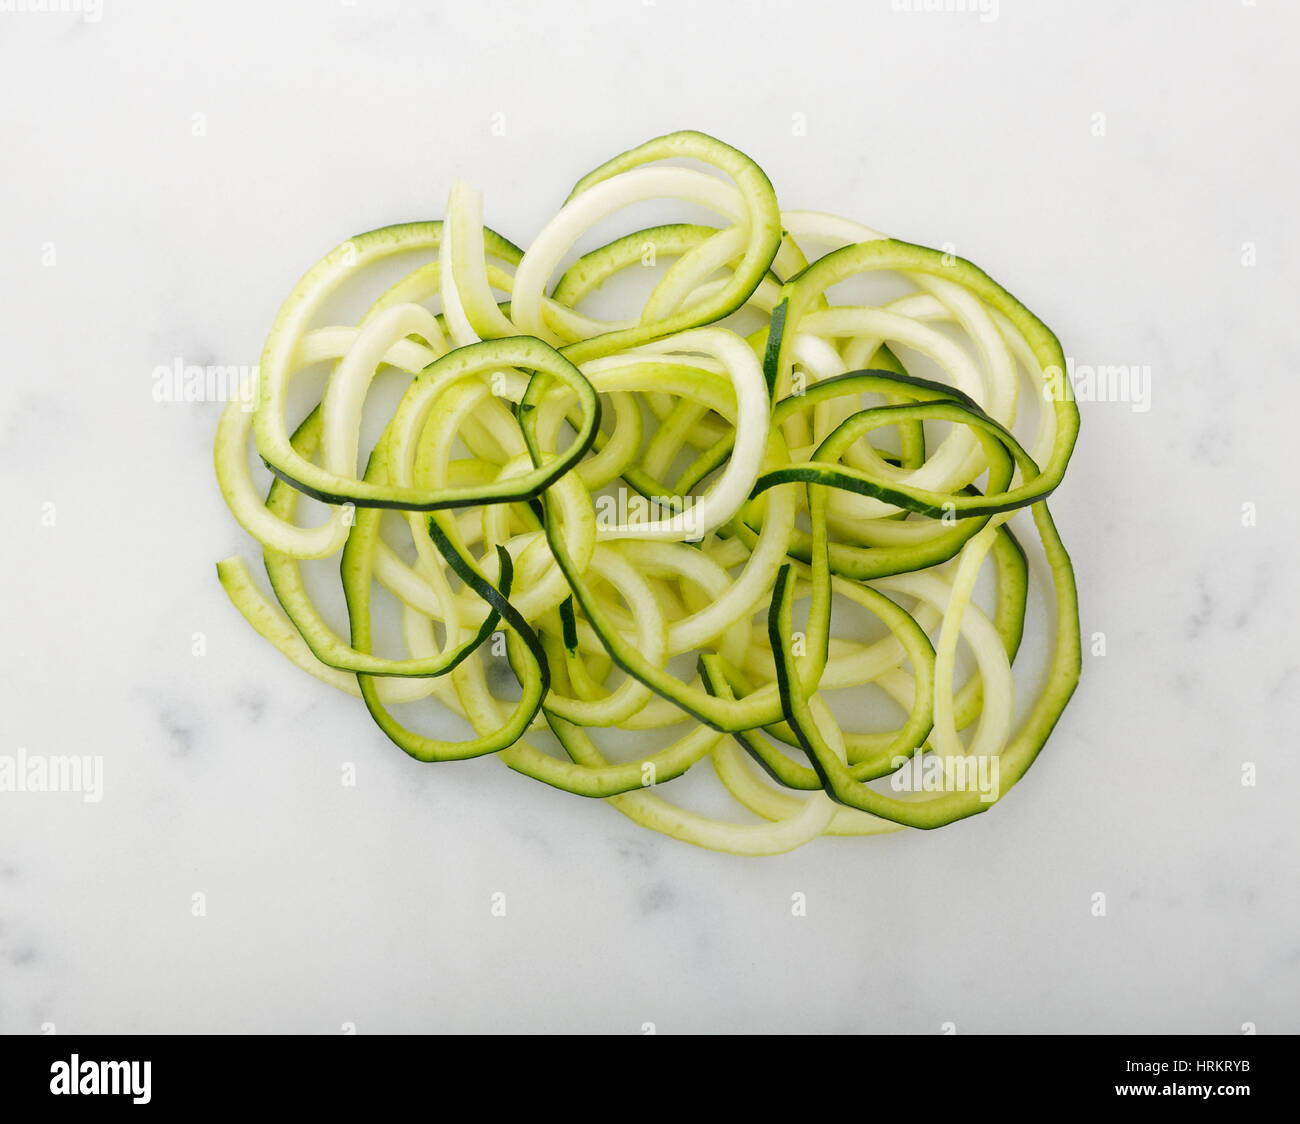 Zucchini noodles displayed on white Stock Photo